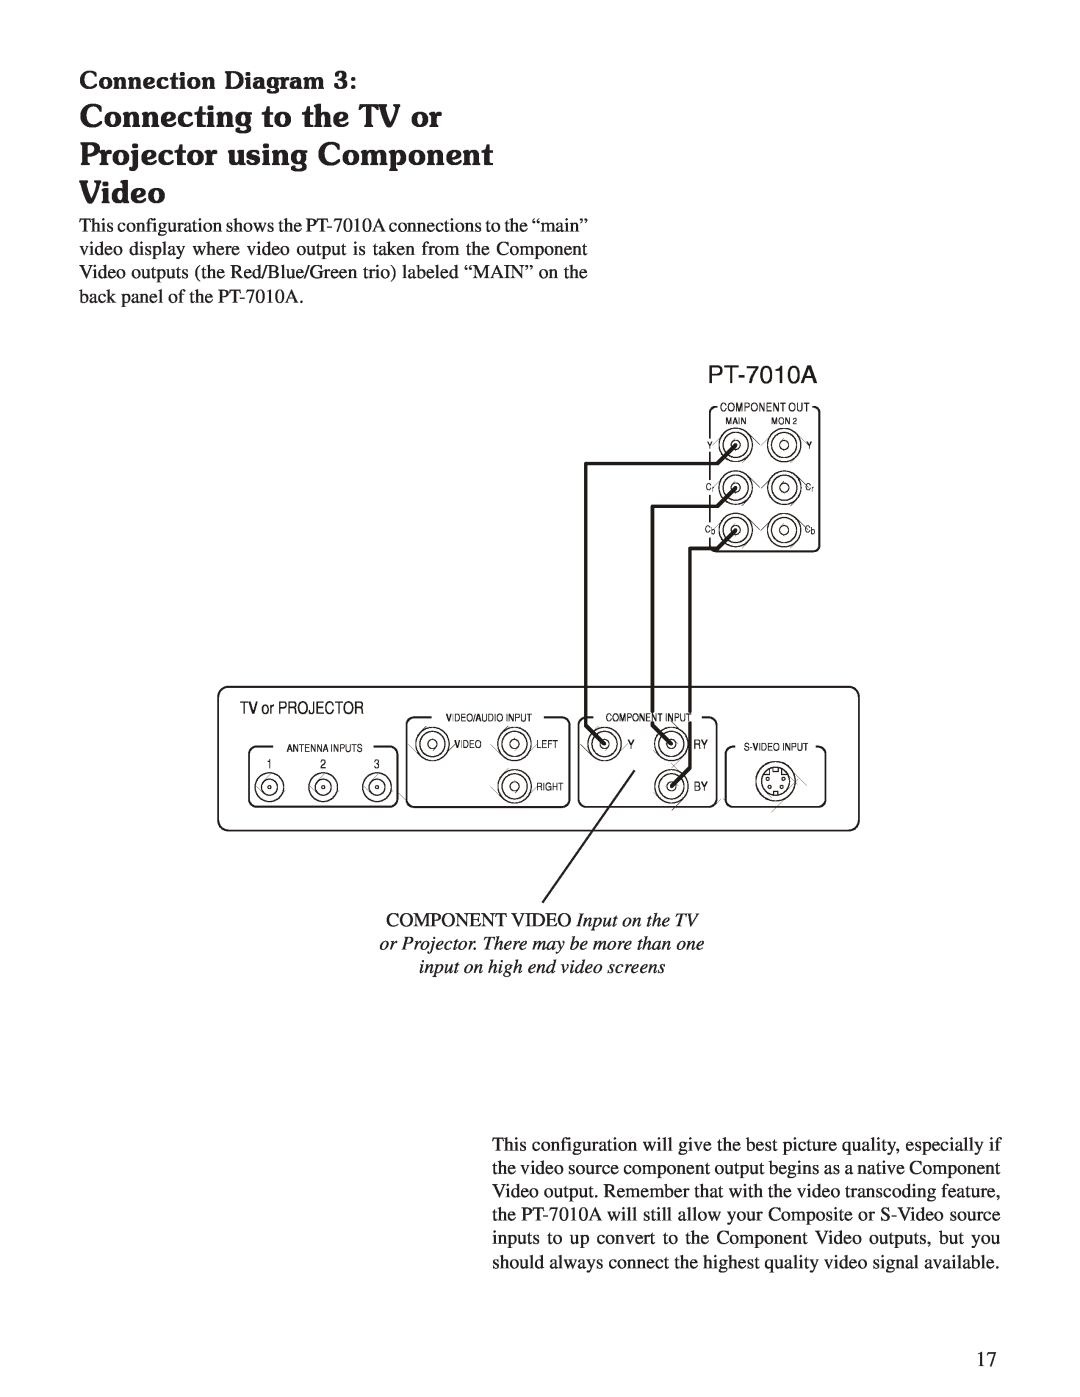 Sherbourn Technologies PT-7010A owner manual Connecting to the TV or Projector using Component, Video, Connection Diagram 